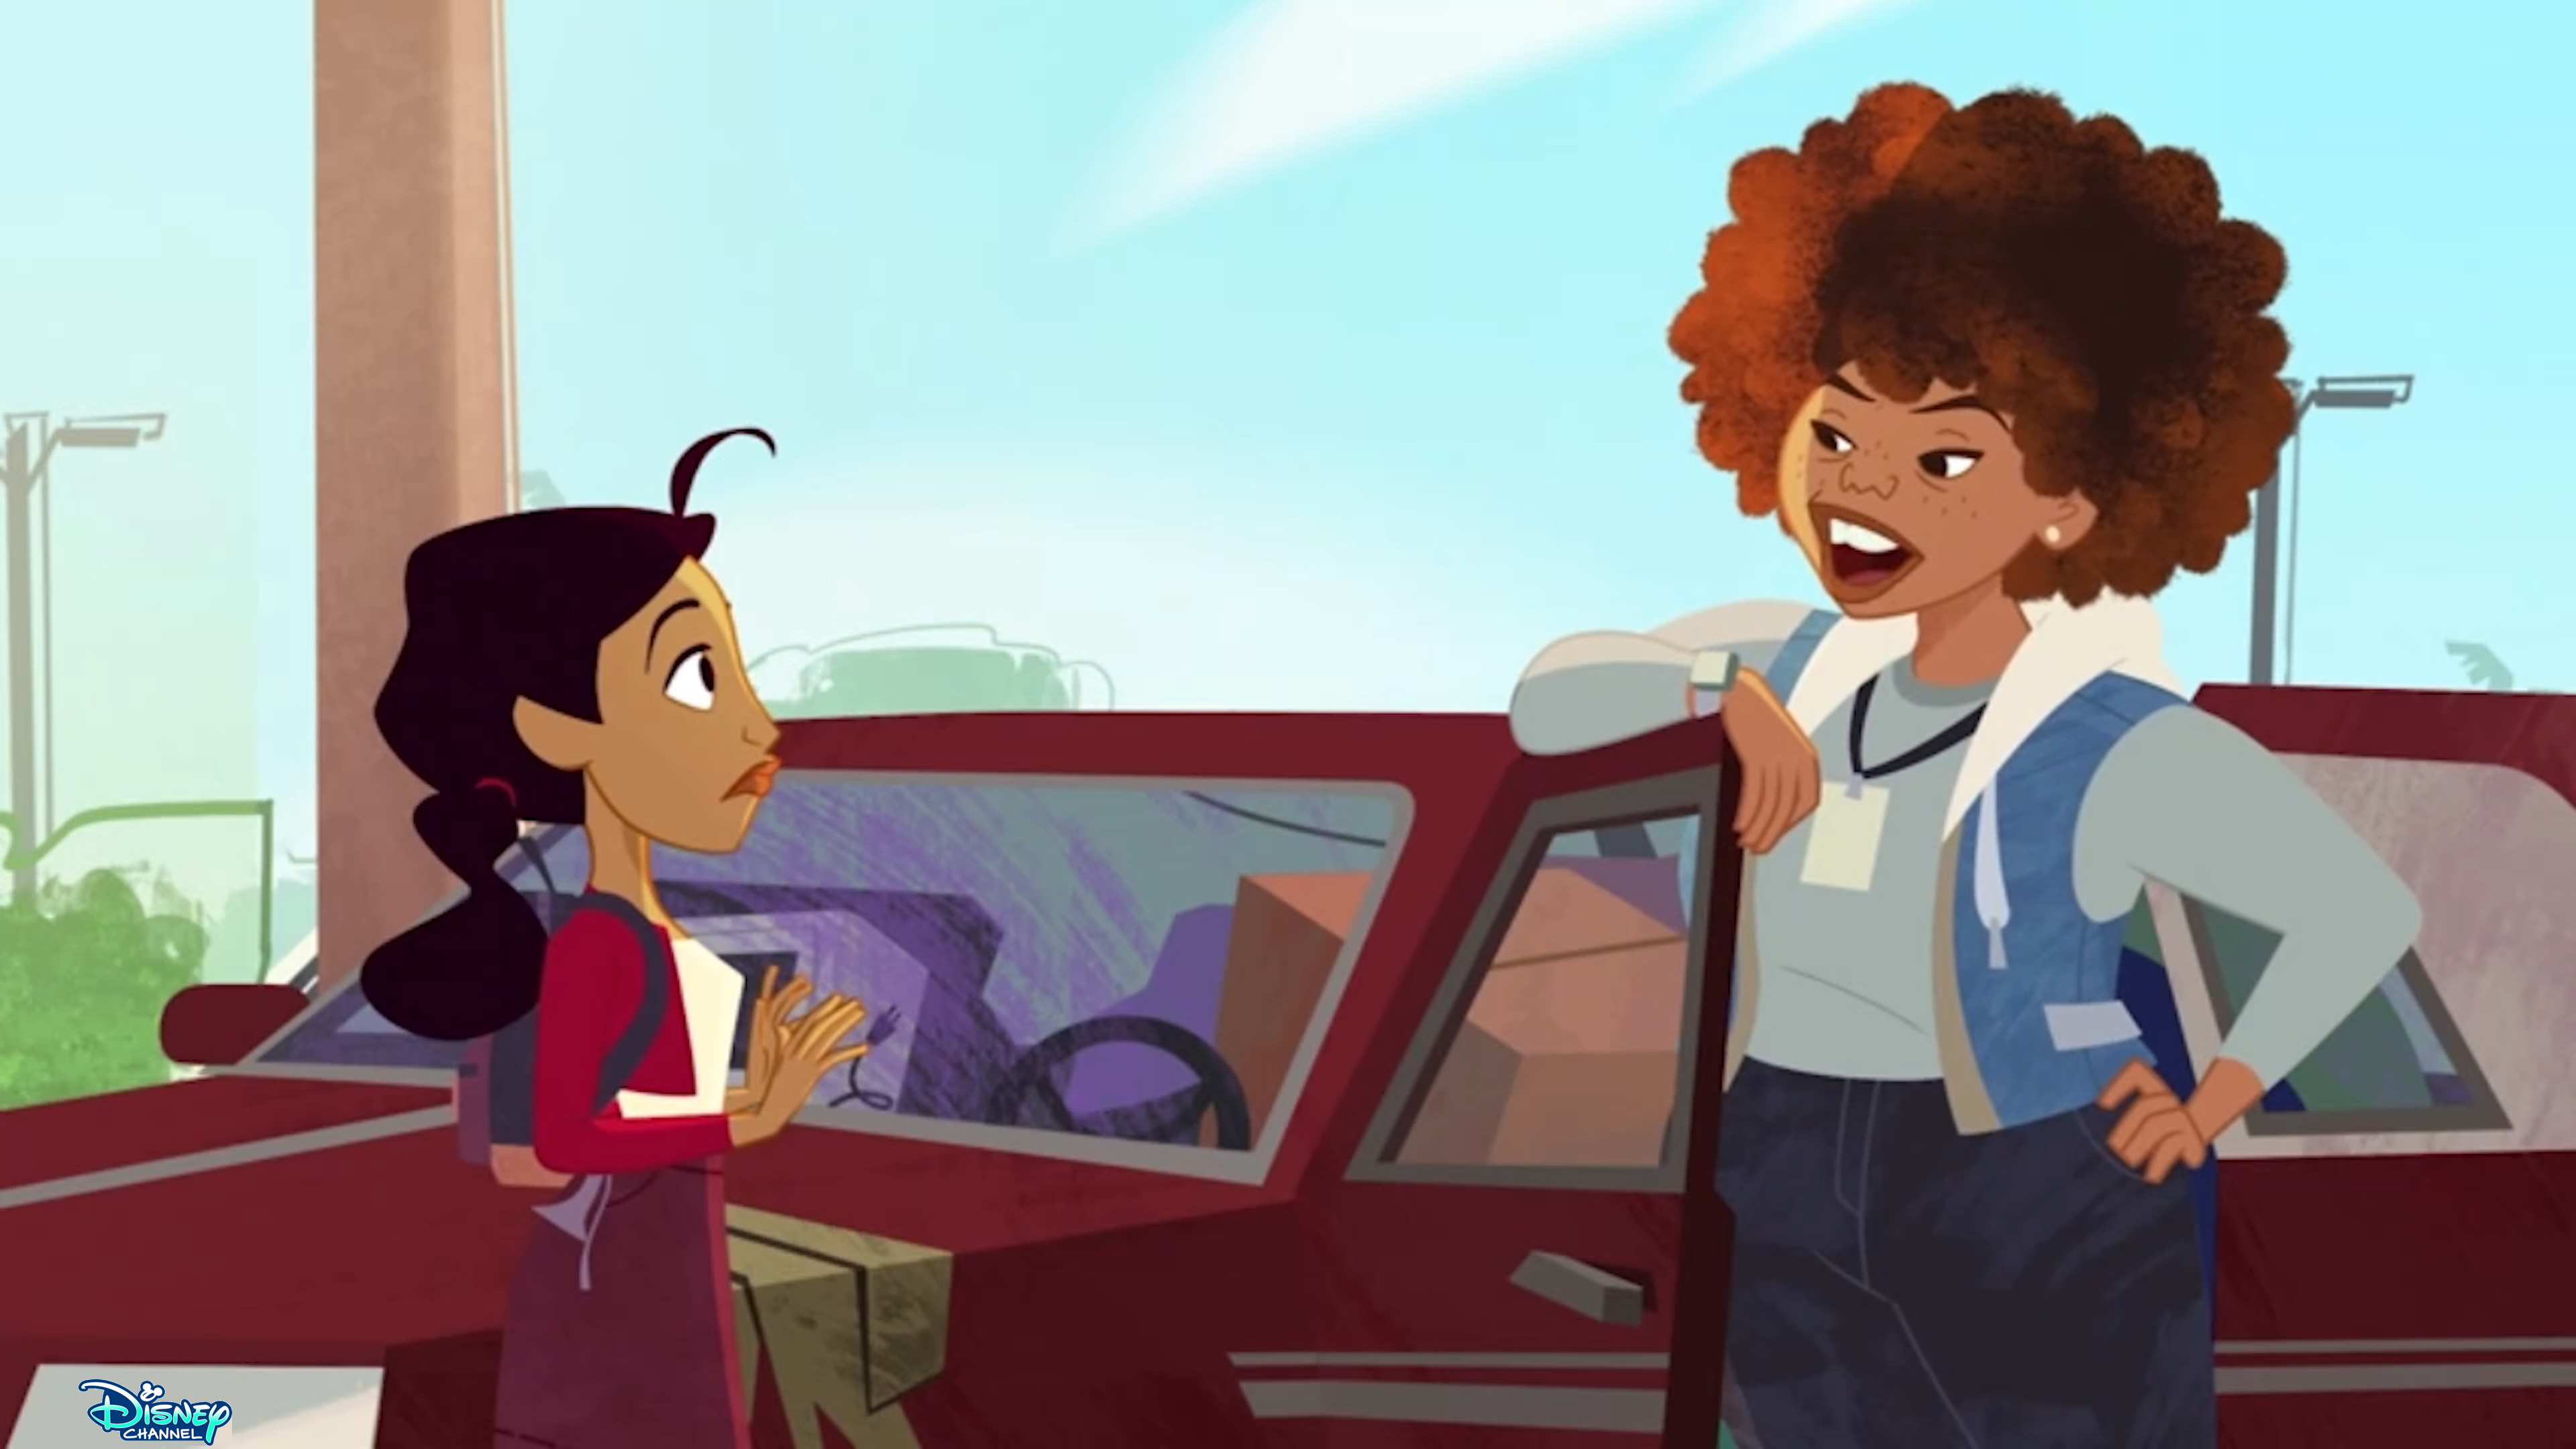  The Proud Family: Louder and Prouder - halaman awal School Promo disney Channel 1